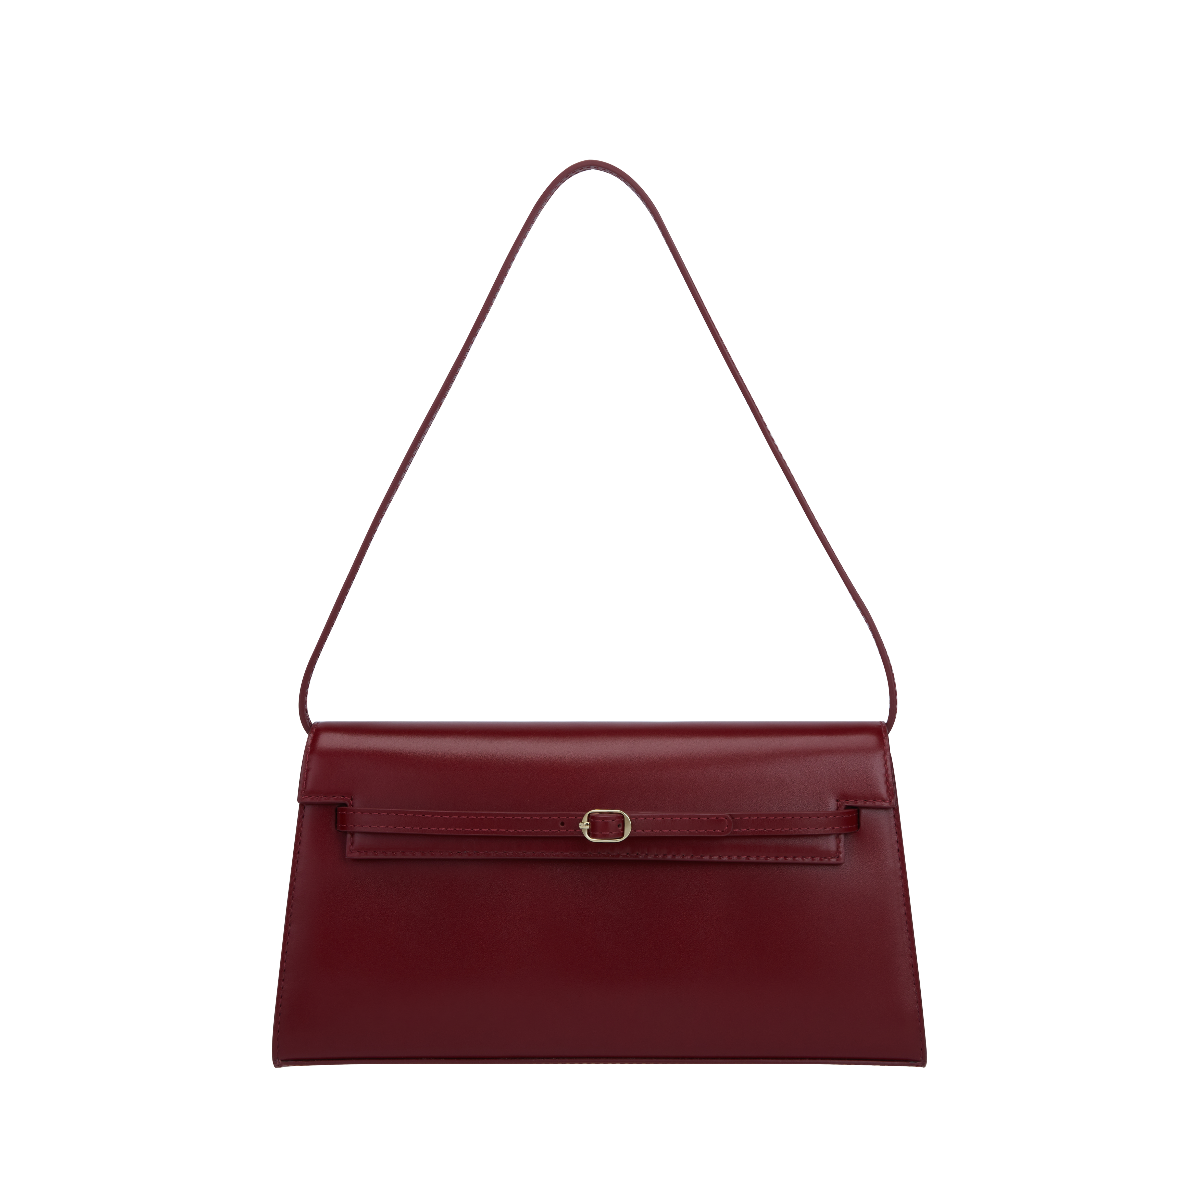 Dark Cherry Shoulder Bag(Pre Order Only.Will Ship on May 5th)